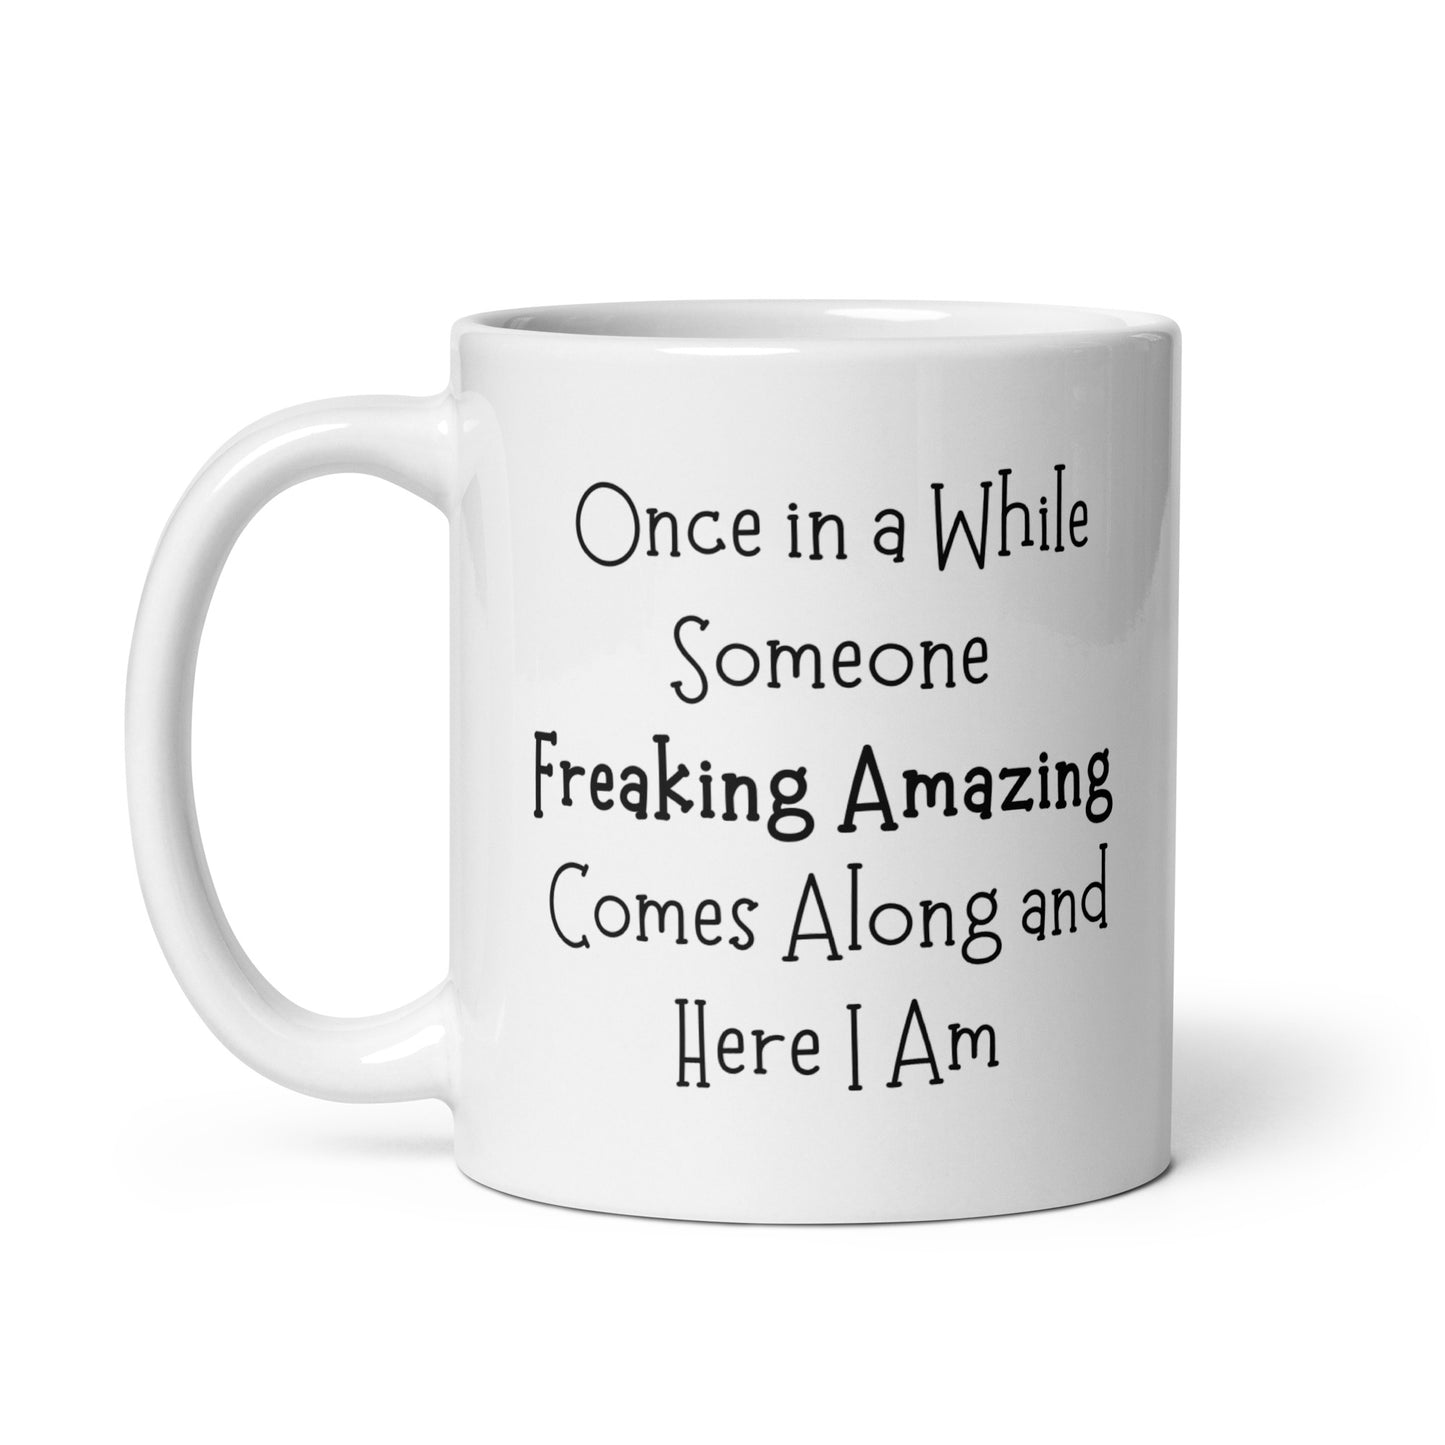 Once On a While Someone Freaking Amazing Comes Along and Here I Am, White Ceramic Coffee Mug